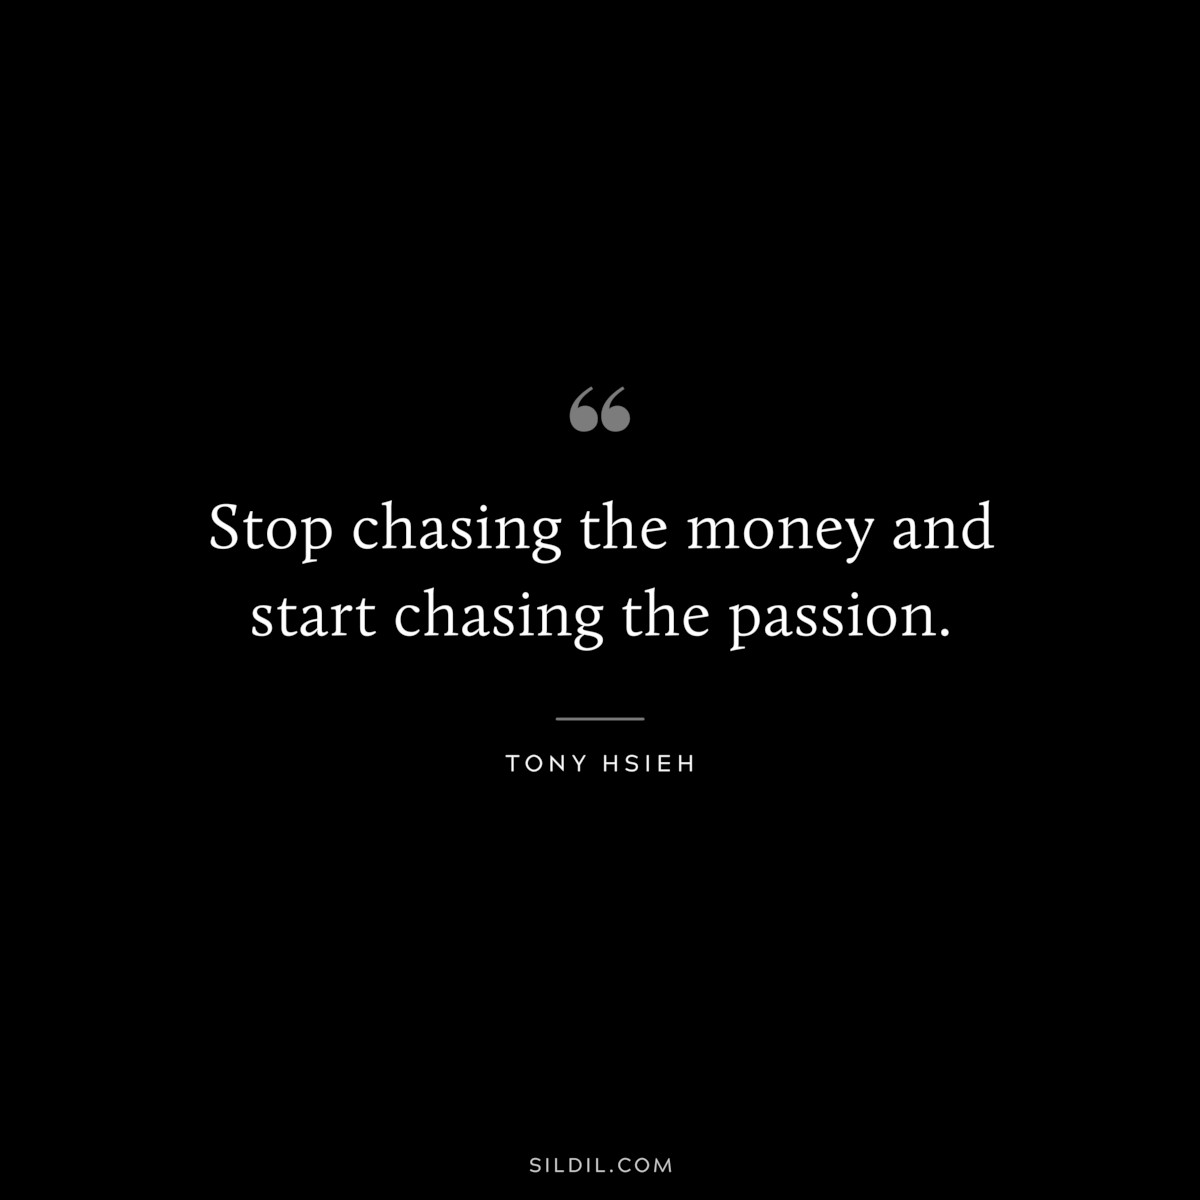 Stop chasing the money and start chasing the passion. ― Tony Hsieh